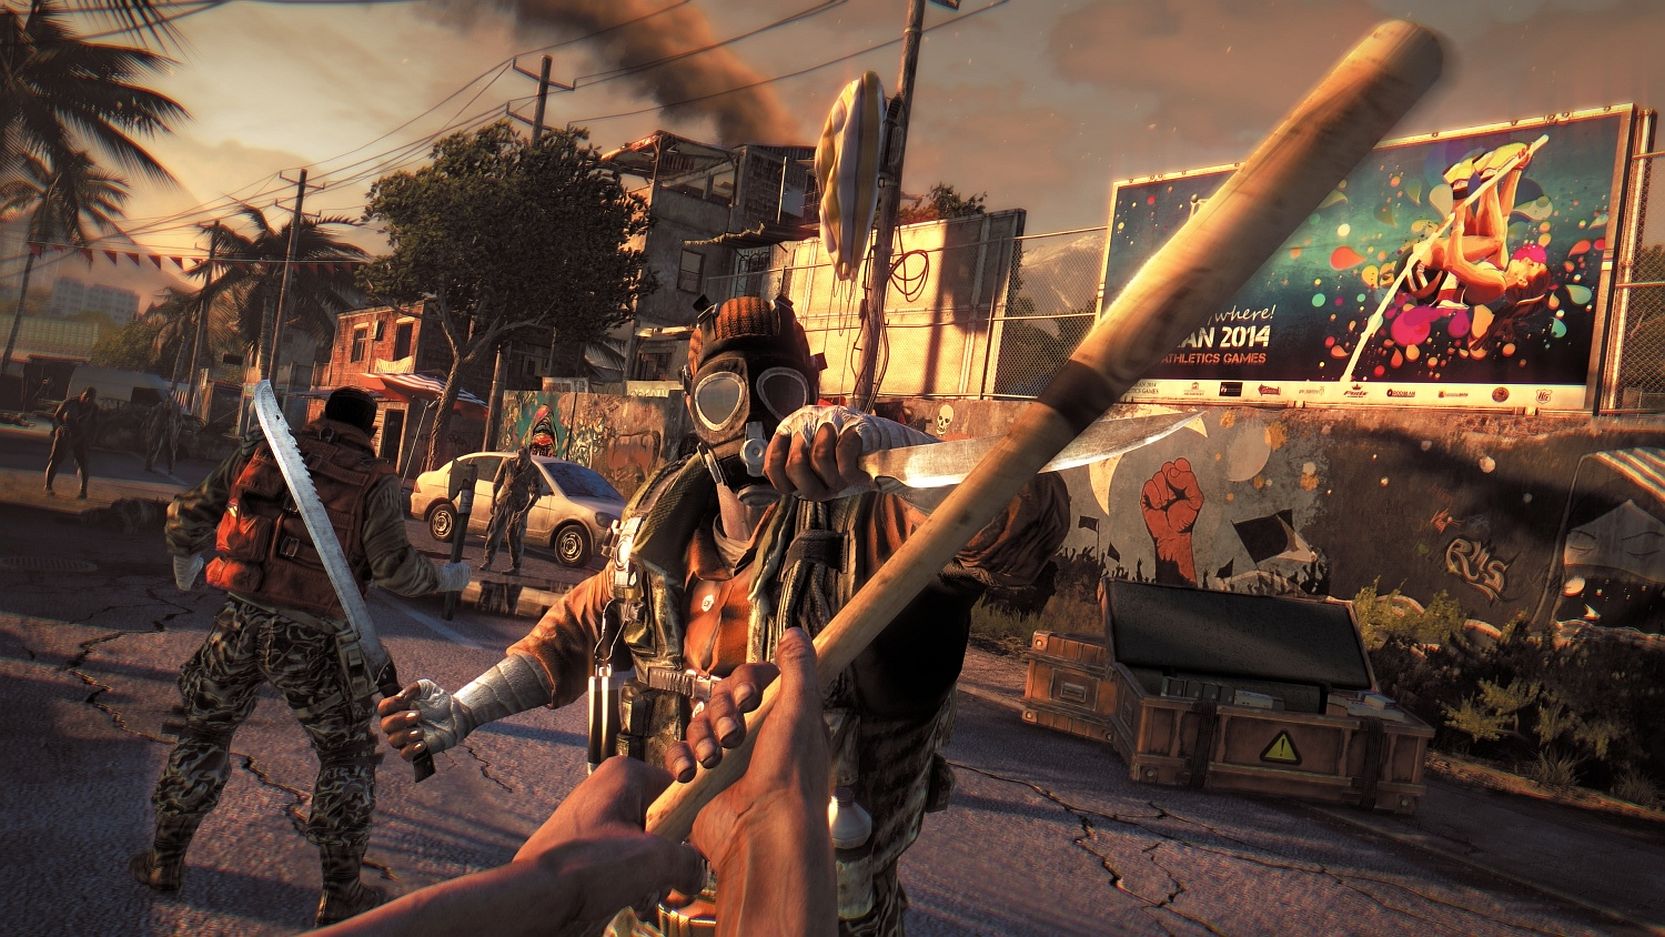 Image for Dying Light: Definitive Edition out tomorrow, brings seven years of content to an end